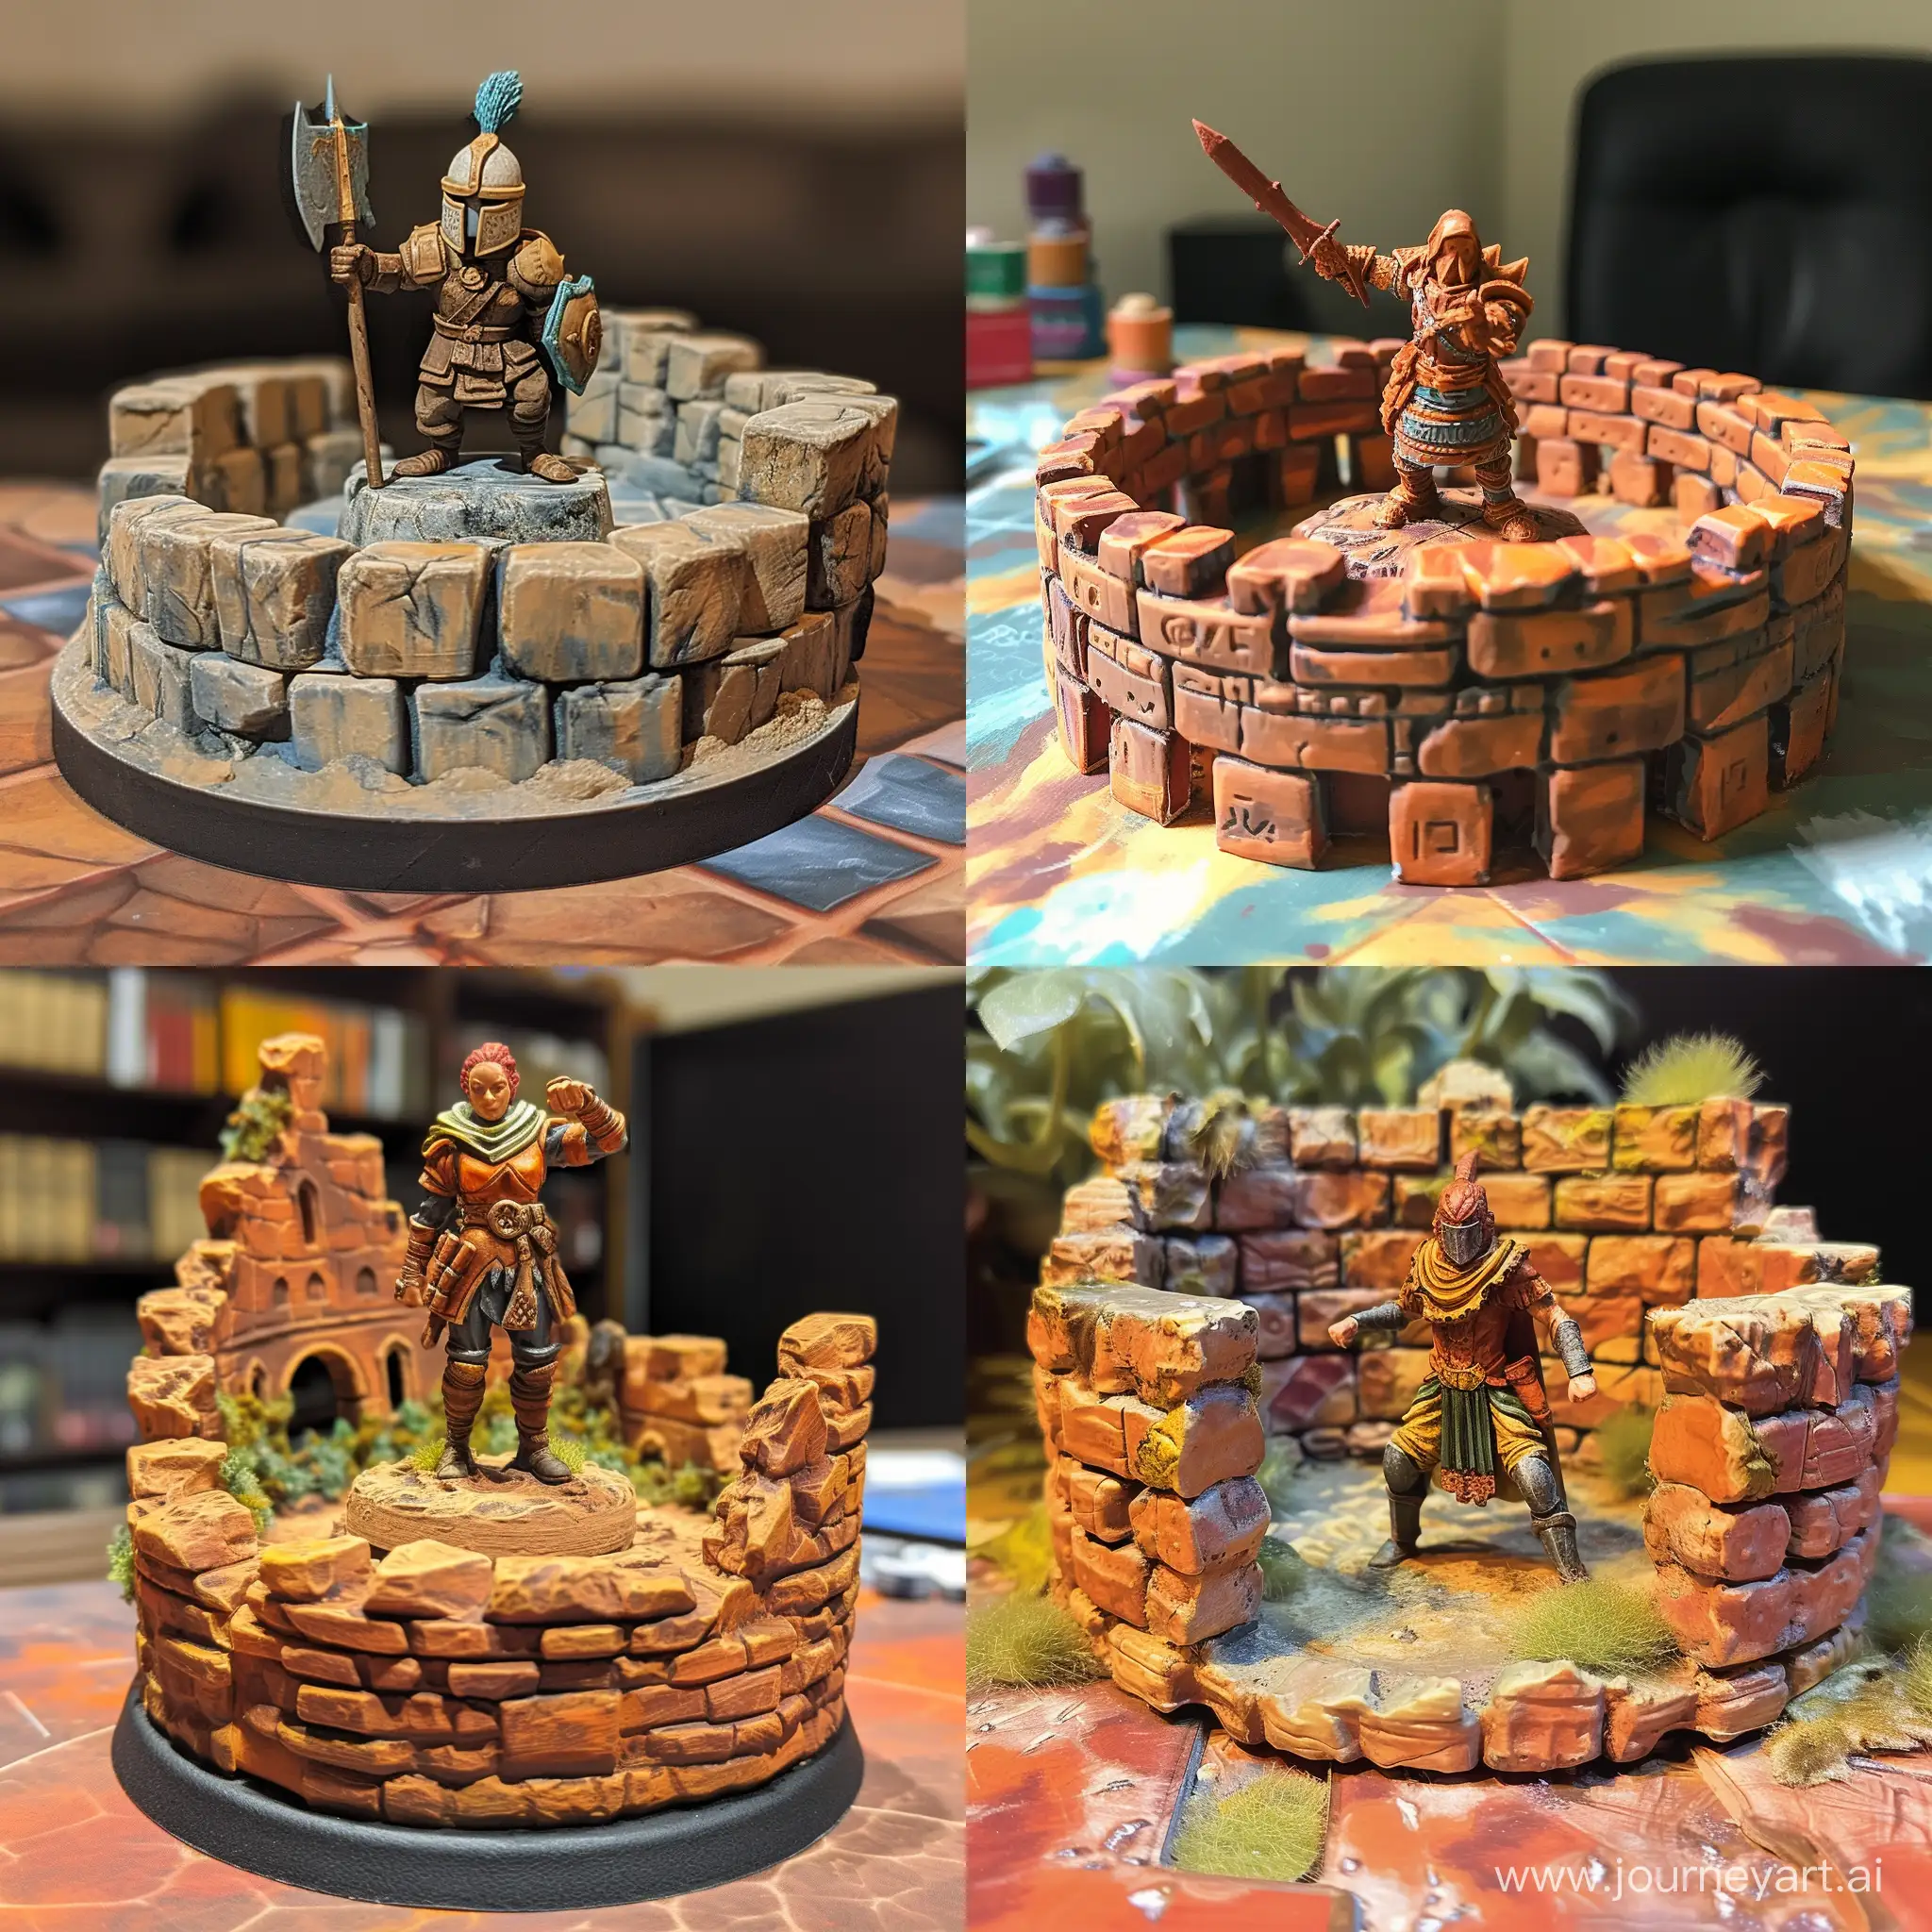 an artifact for a board game. an earthen rampart around the character. everything is painted in the style of hand paint